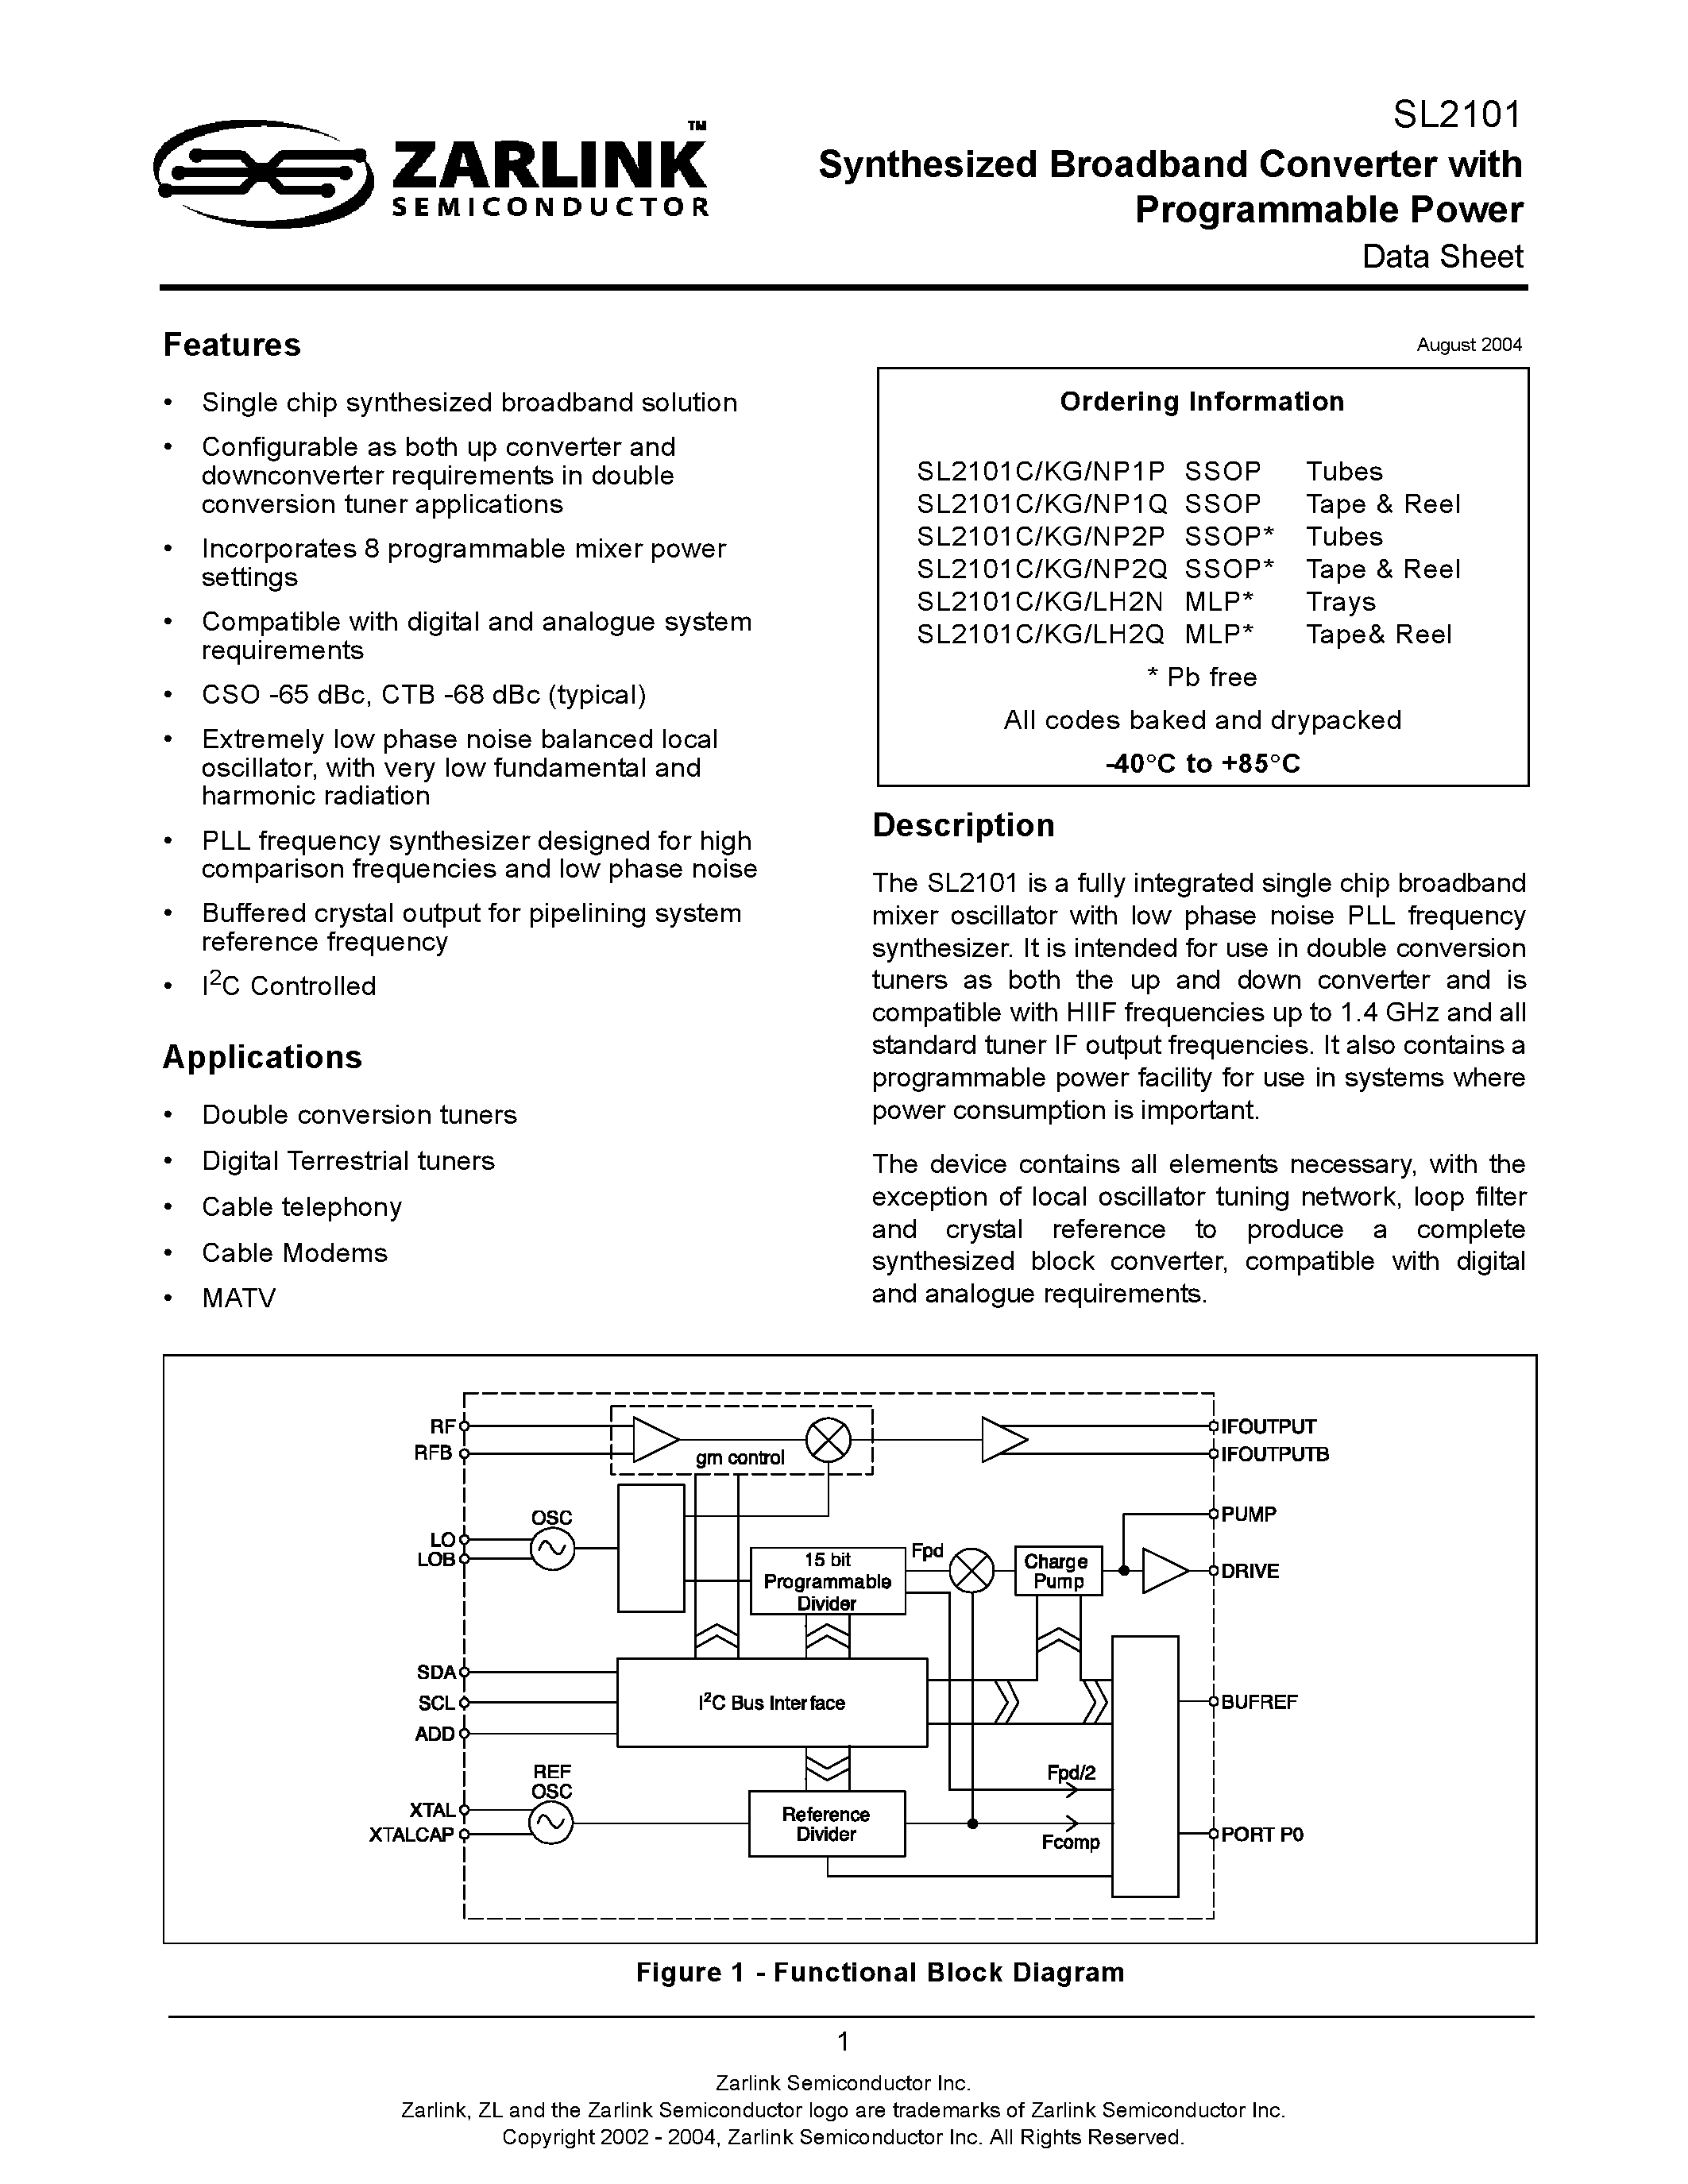 Datasheet SL2101CLH2Q - Synthesized Broadband Converter with Programmable Power page 1